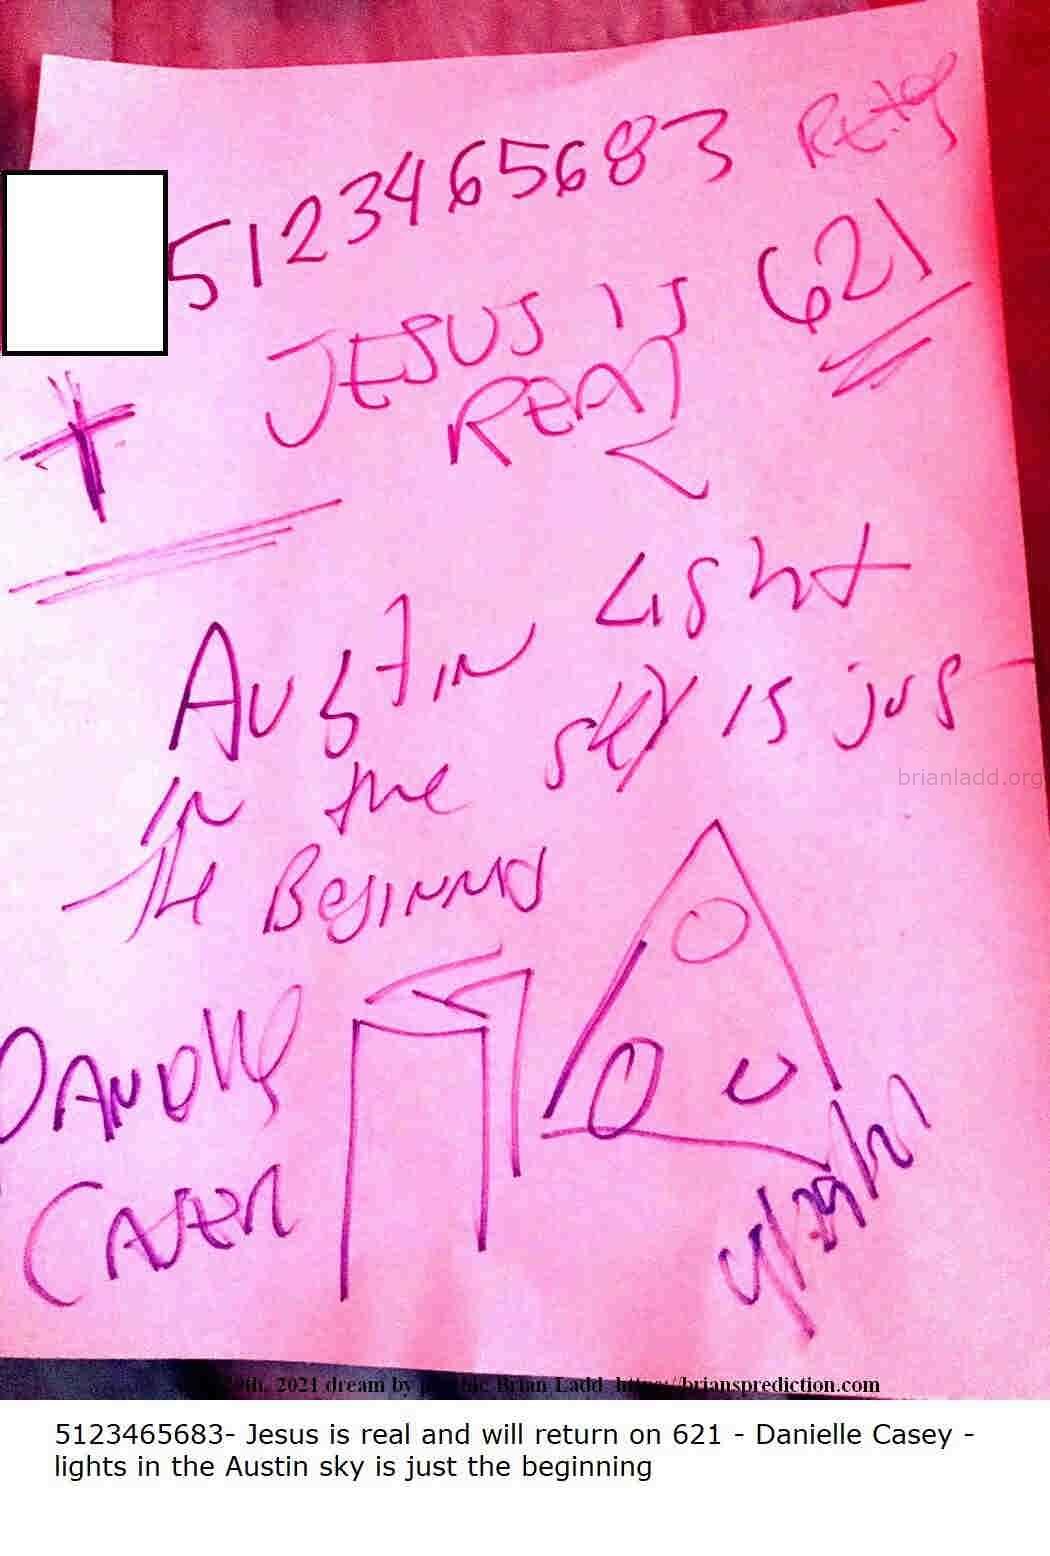 14811 29 April 2021 6 - 5123465683- Jesus Is Real And Will Return On 621 - Danielle Casey - Lights In The Austin Sky Is ...
5123465683- Jesus Is Real And Will Return On 621 - Danielle Casey - Lights In The Austin Sky Is Just The Beginning.
